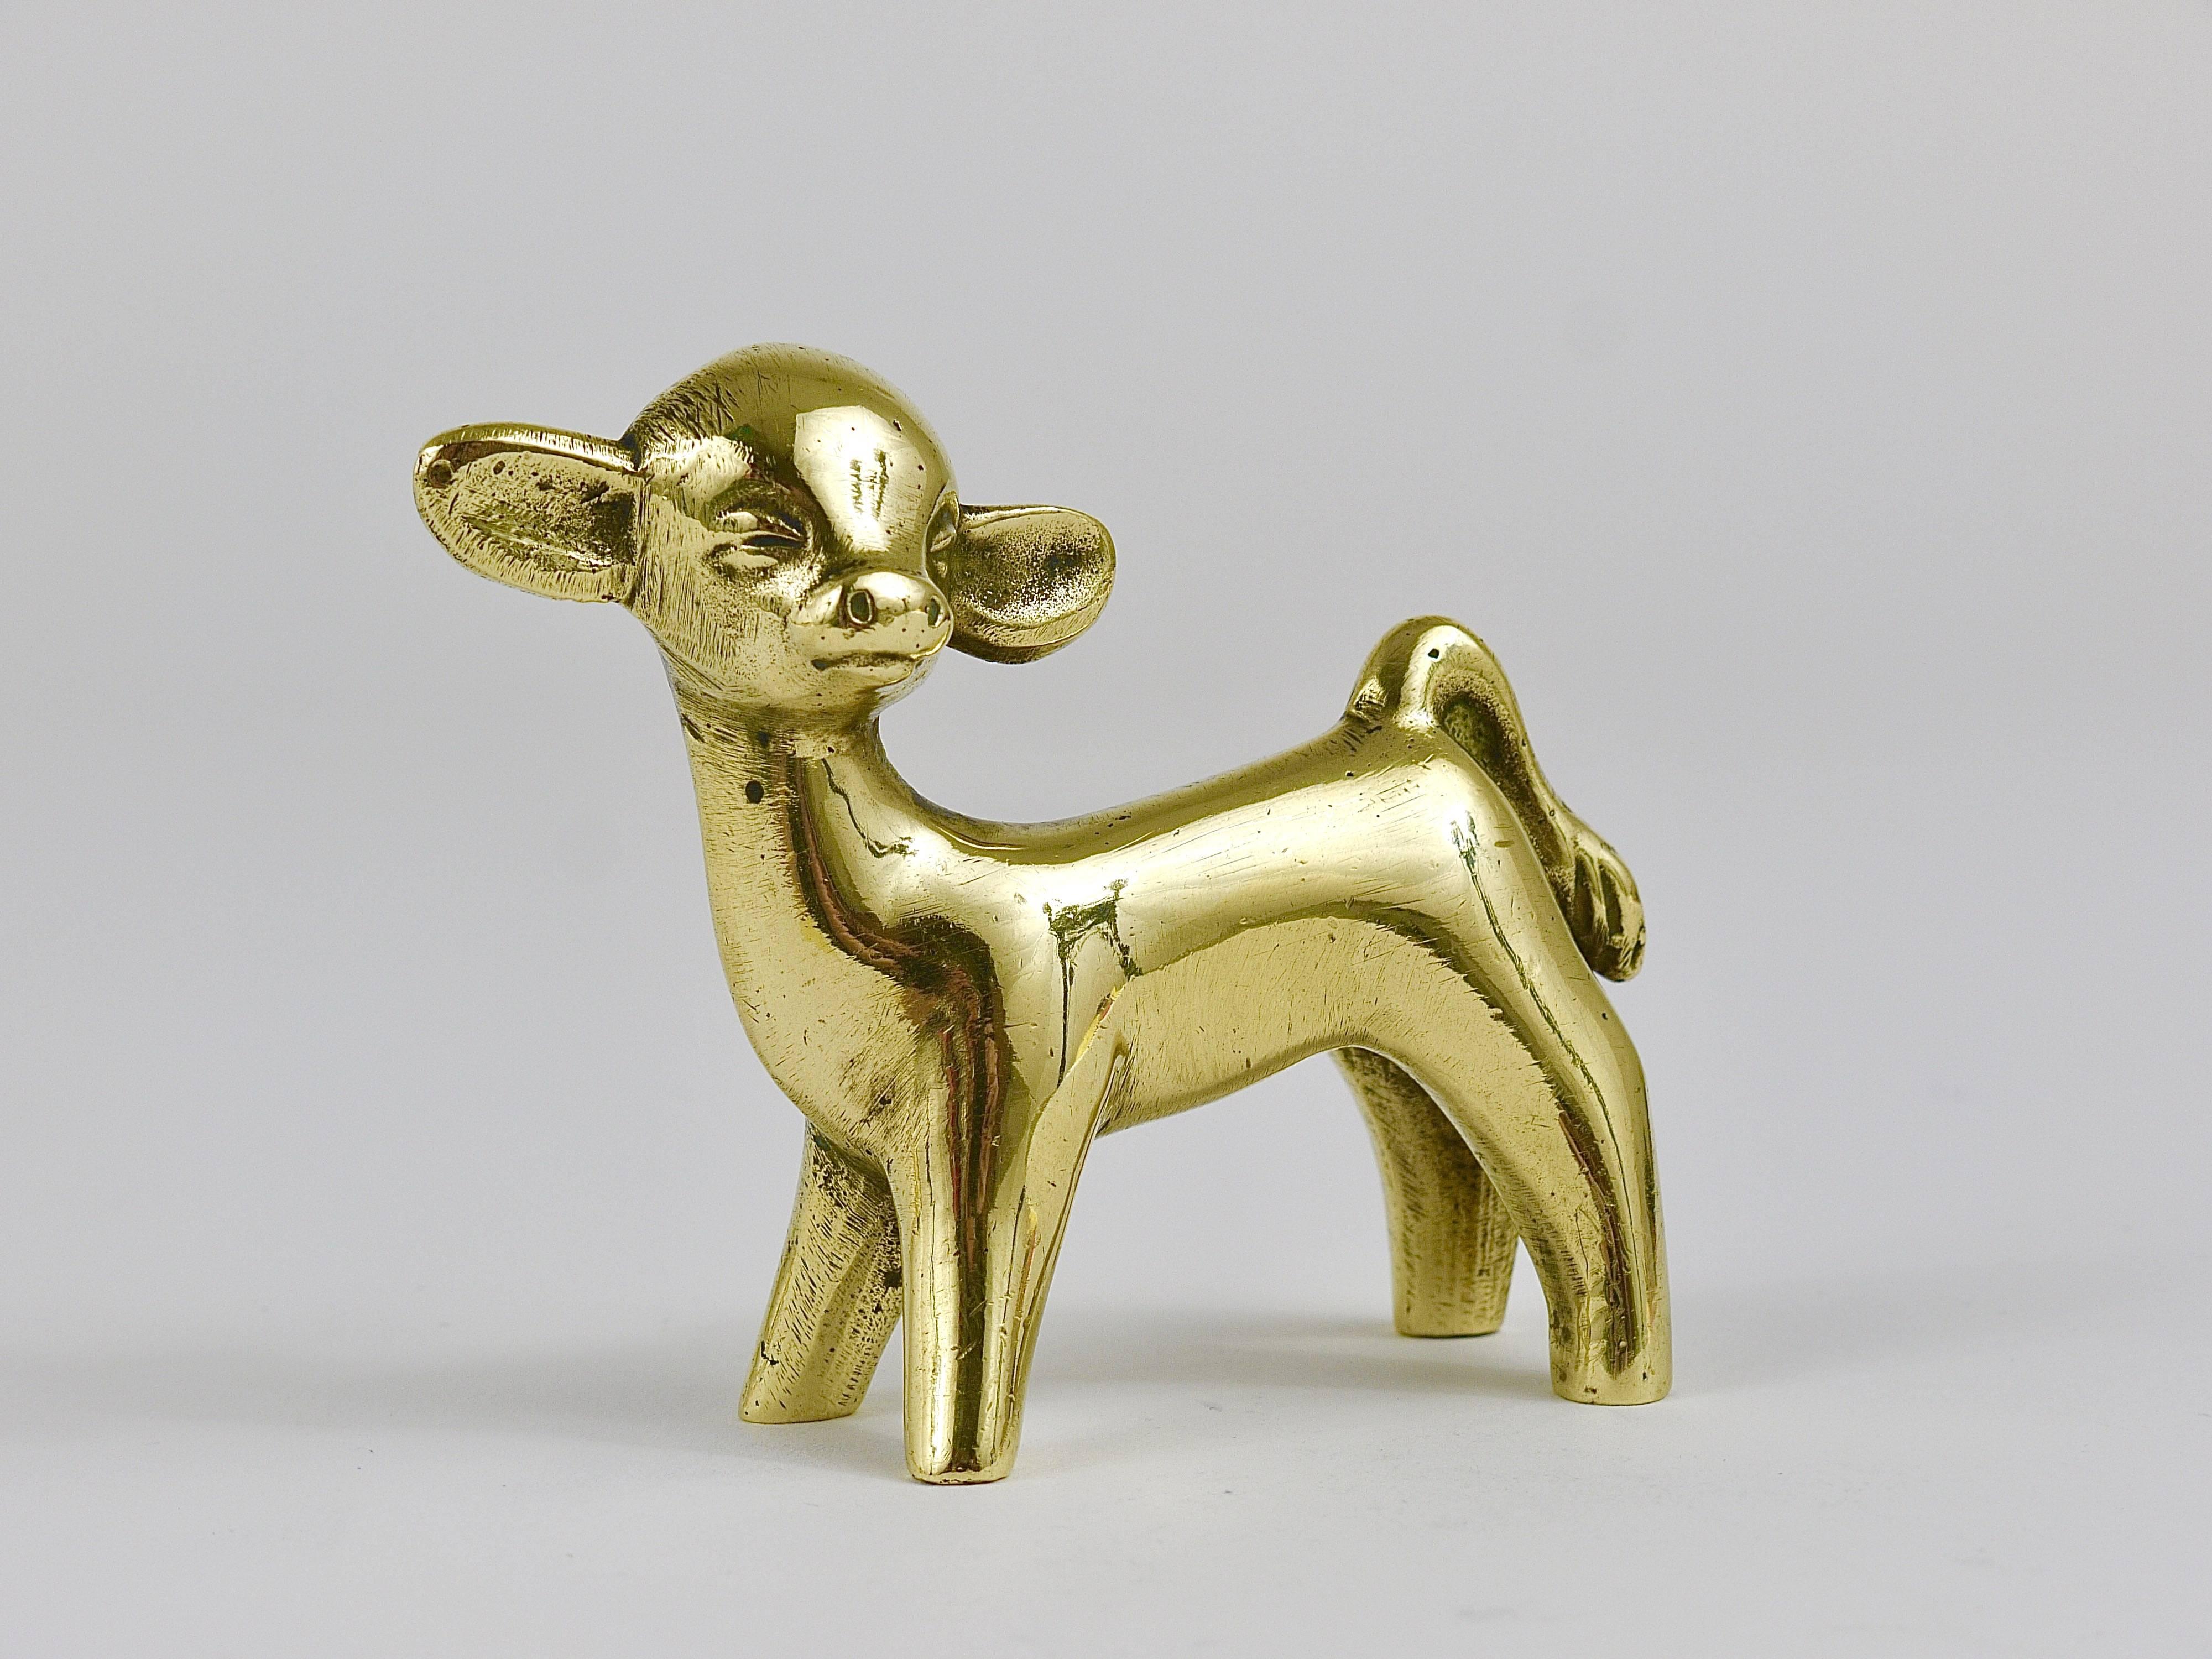 A lovely calf / baby cow sculpture made of brass from the 1950s. Designed by Walter Bosse, executed by Herta Baller, Austria. In very good condition with marginal patina.